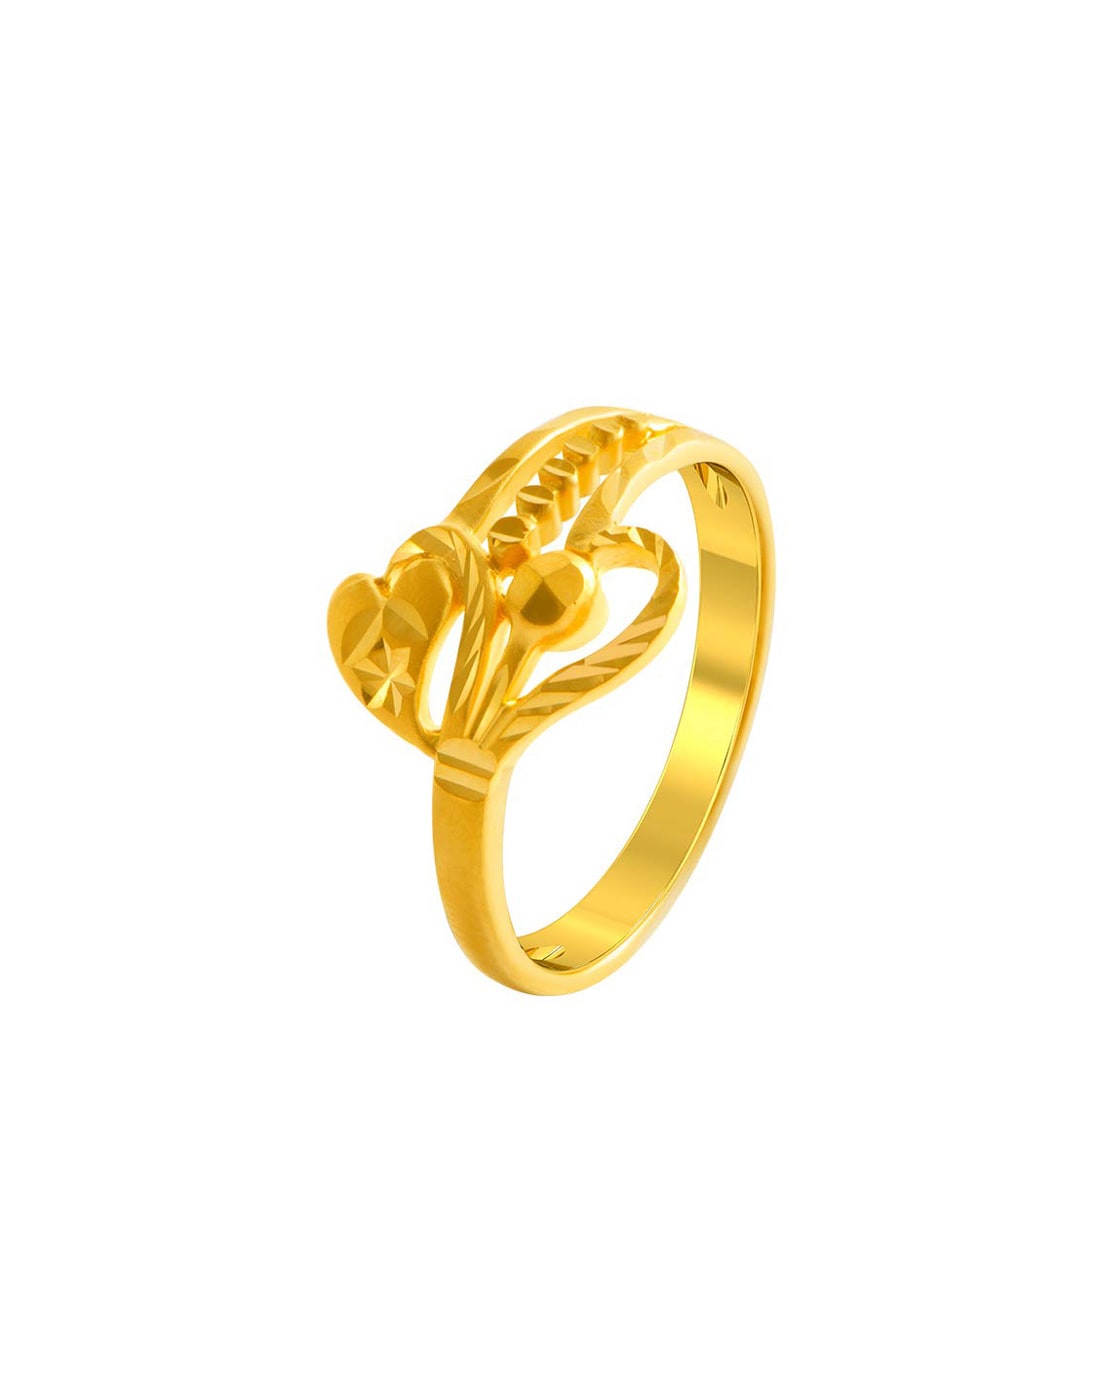 Mia Jewellery Gold Ring in Jaipur - Dealers, Manufacturers & Suppliers  -Justdial